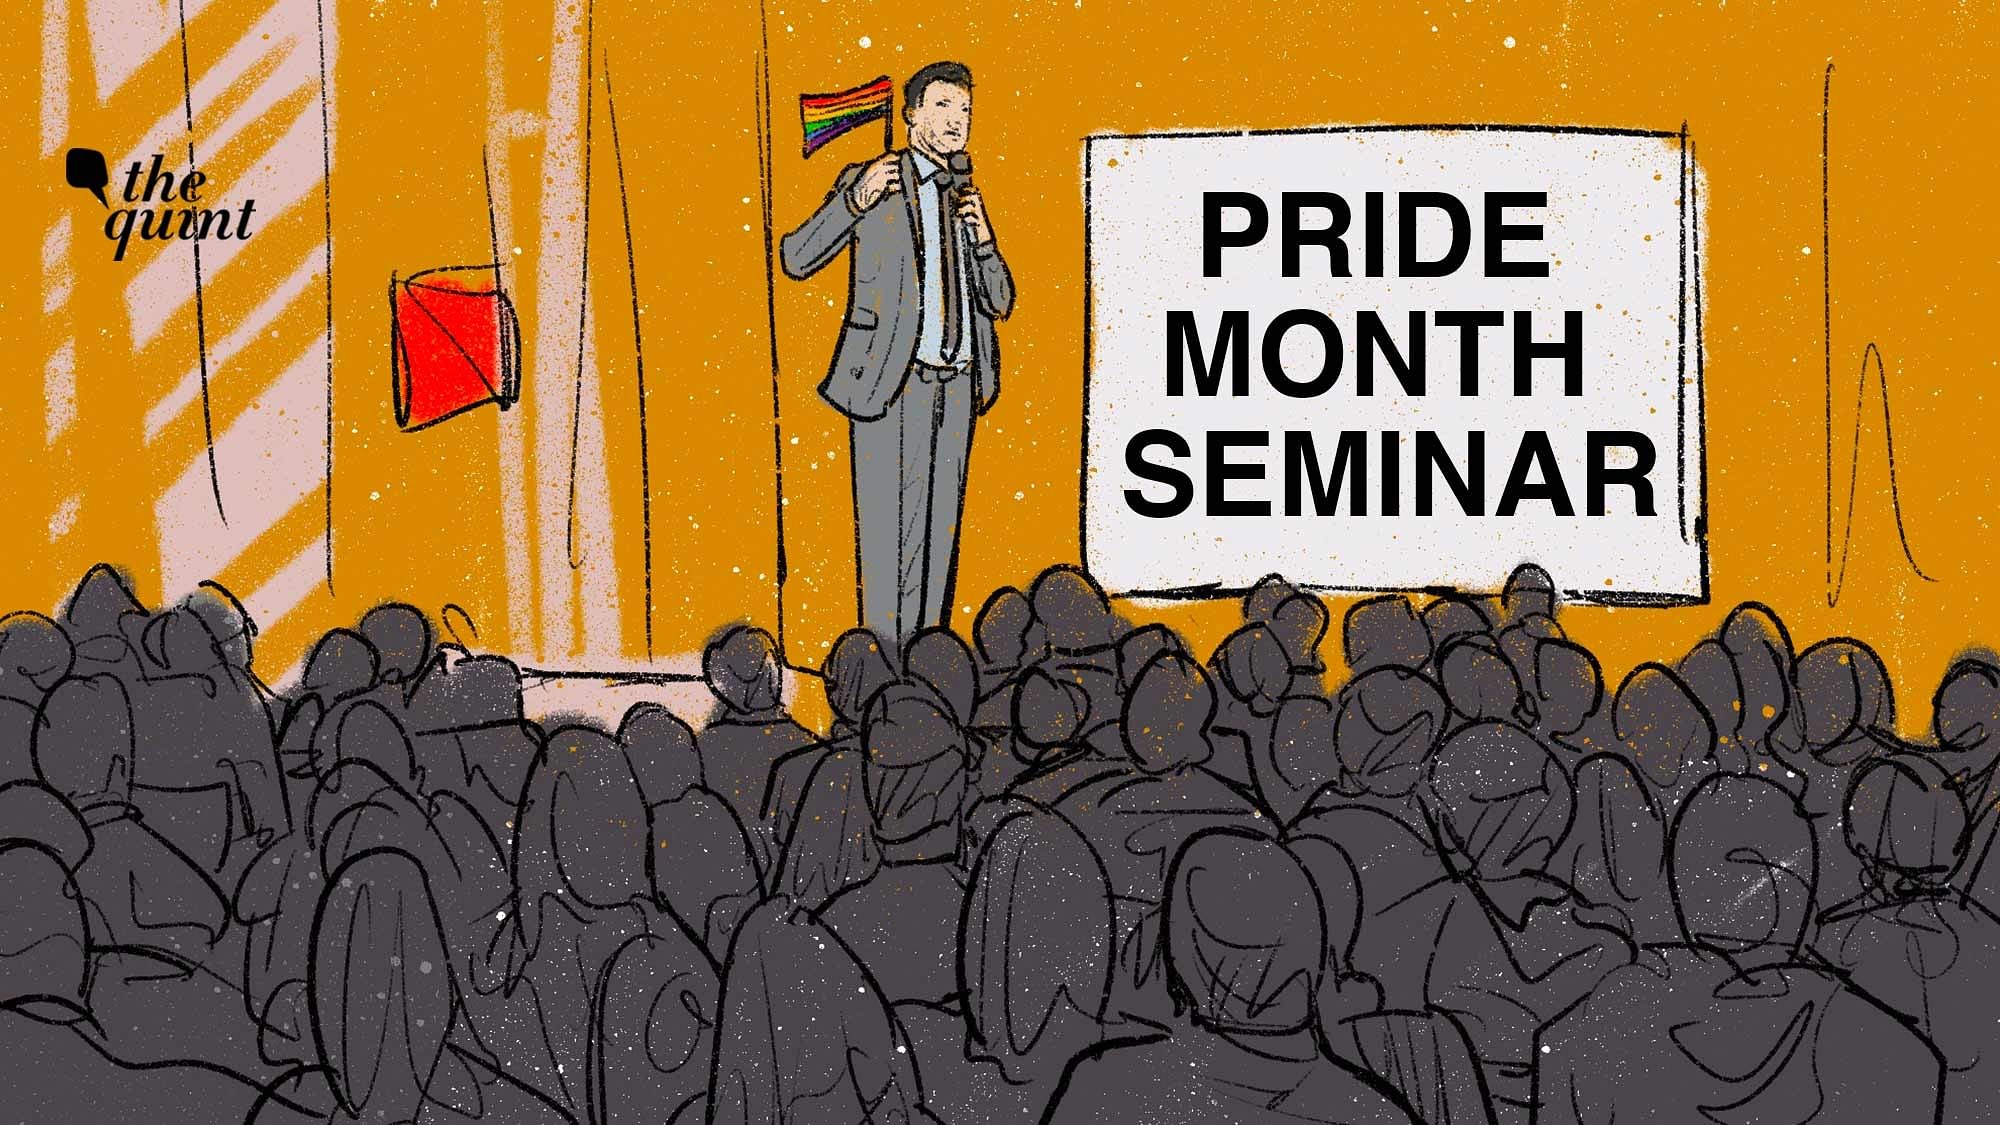 <div class="paragraphs"><p>"Most engineering firms think that they can do a seminar or two during Pride Month and get away with it. That's not how it works," said an LGBT engineer.</p></div>